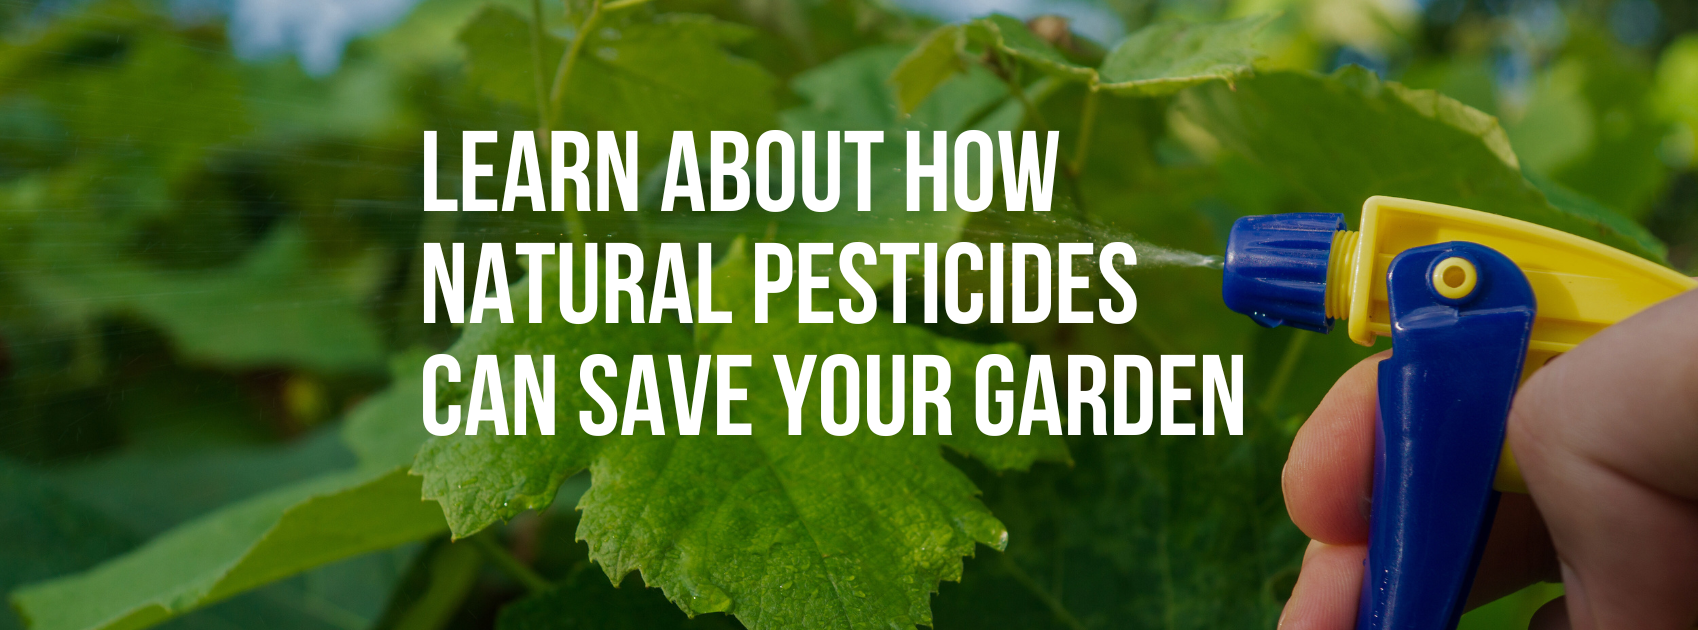 Learn about How Natural Pesticides Can Save Your Garden